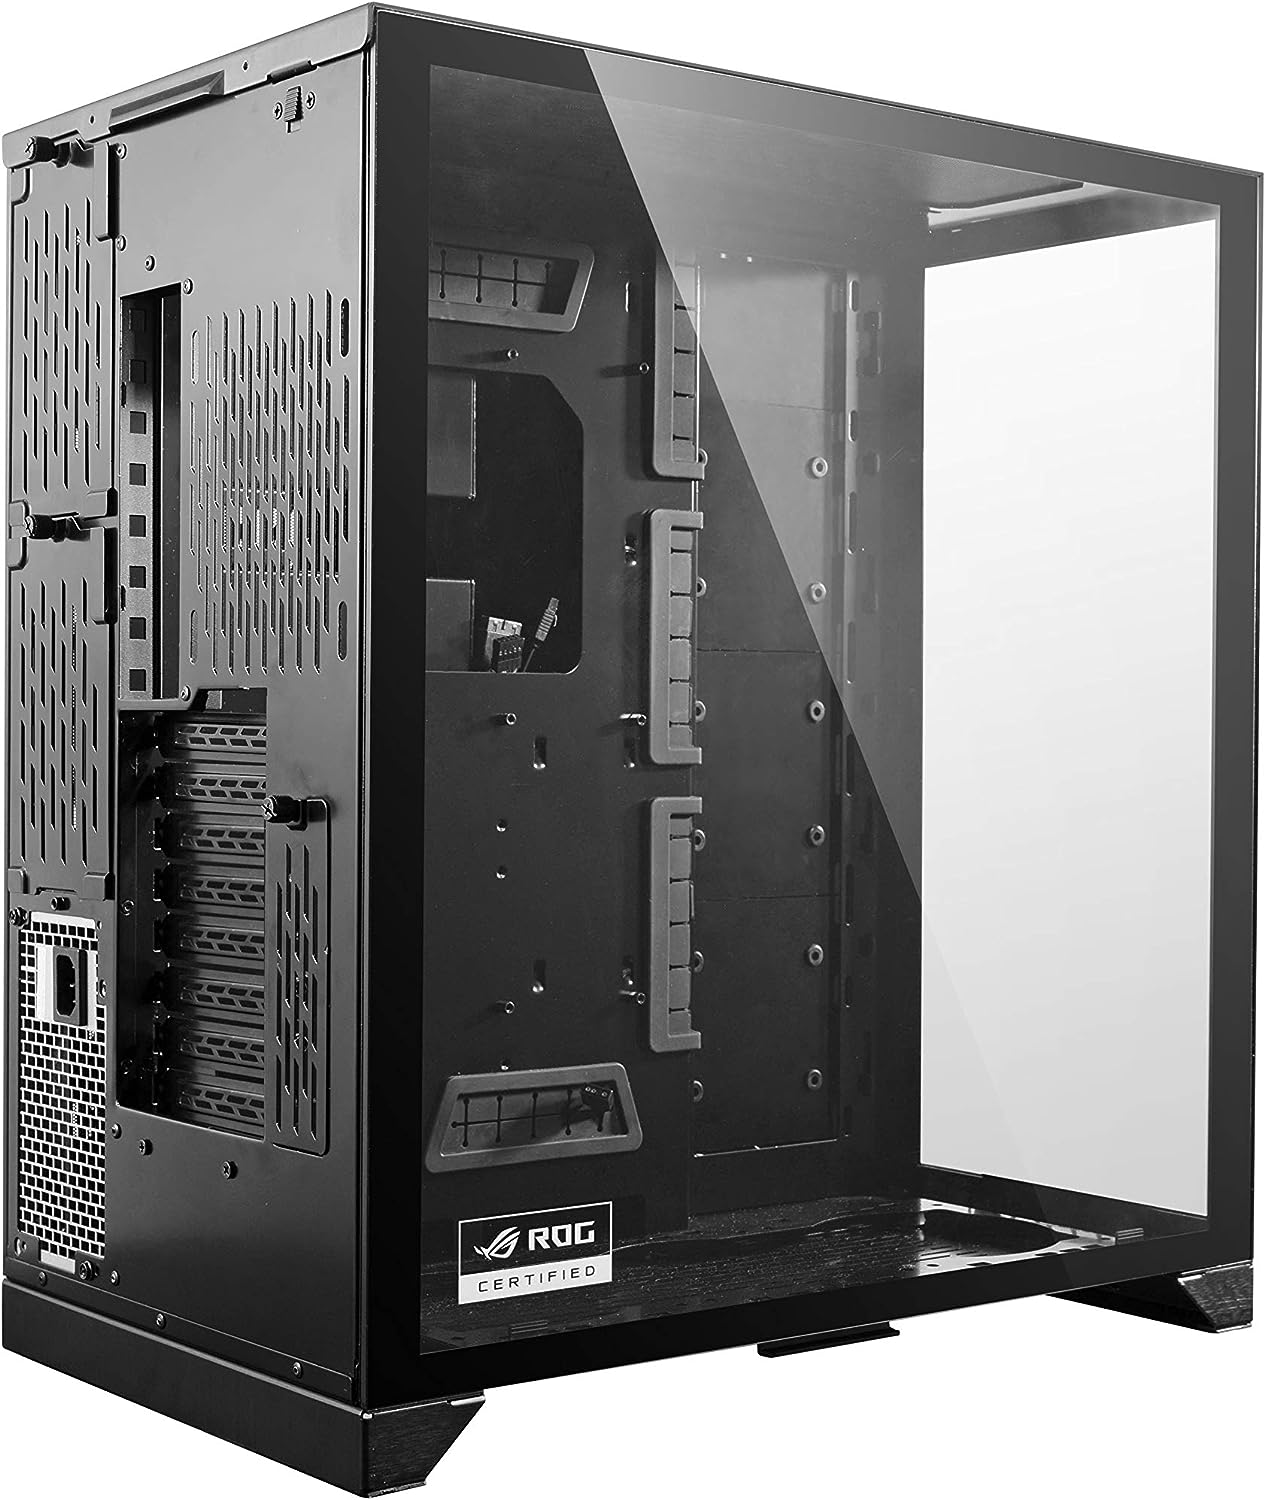 Sleek black ATX full tower case with tempered glass and aluminum front panel 0840353009837